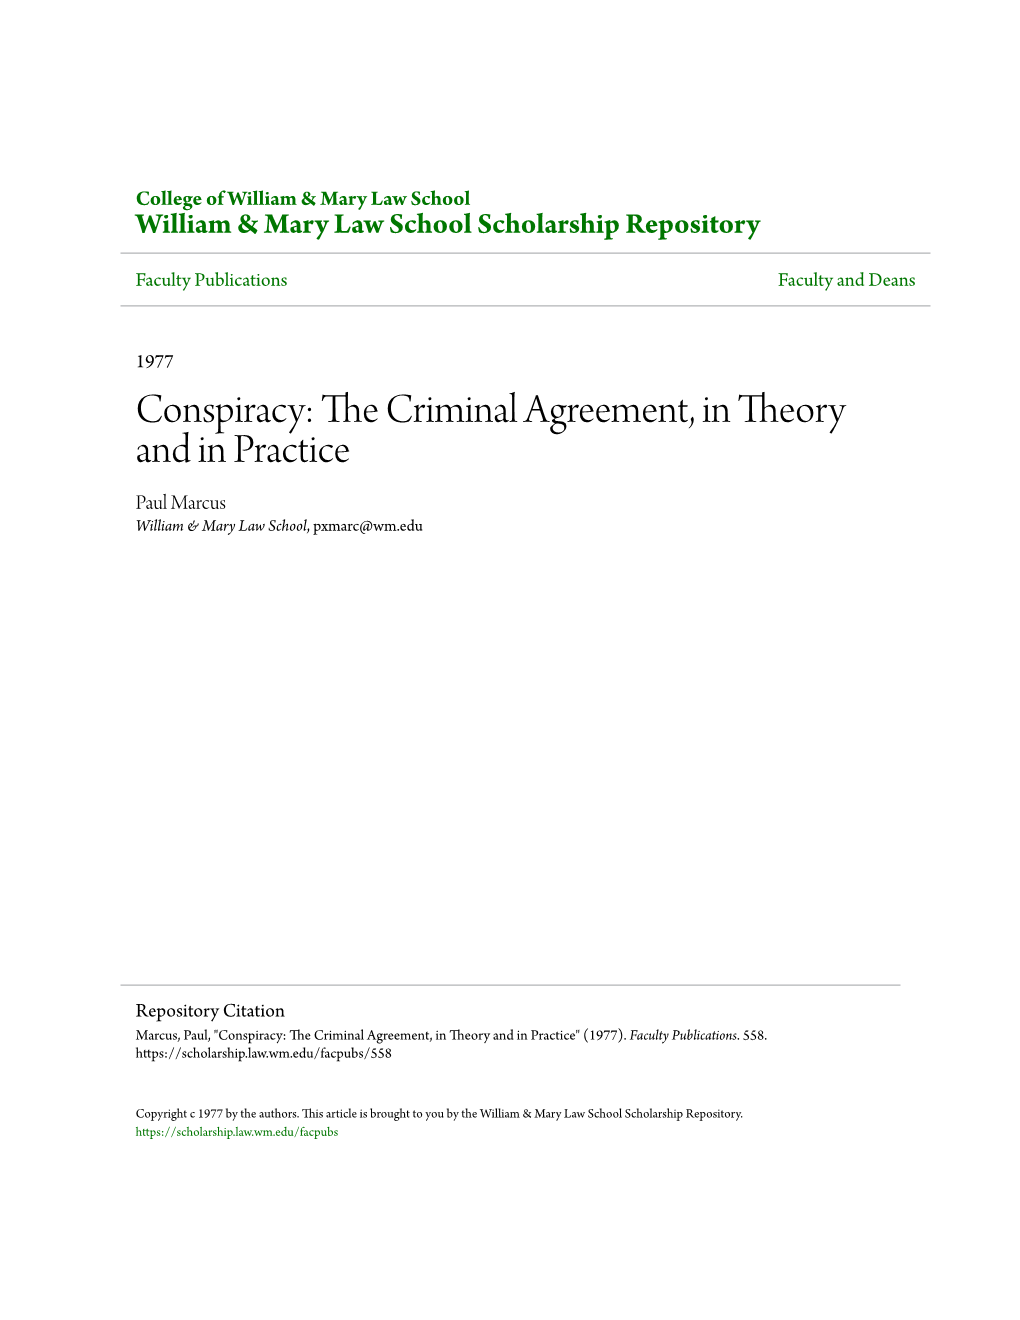 Conspiracy: the Criminal Agreement, in Theory and in Practice